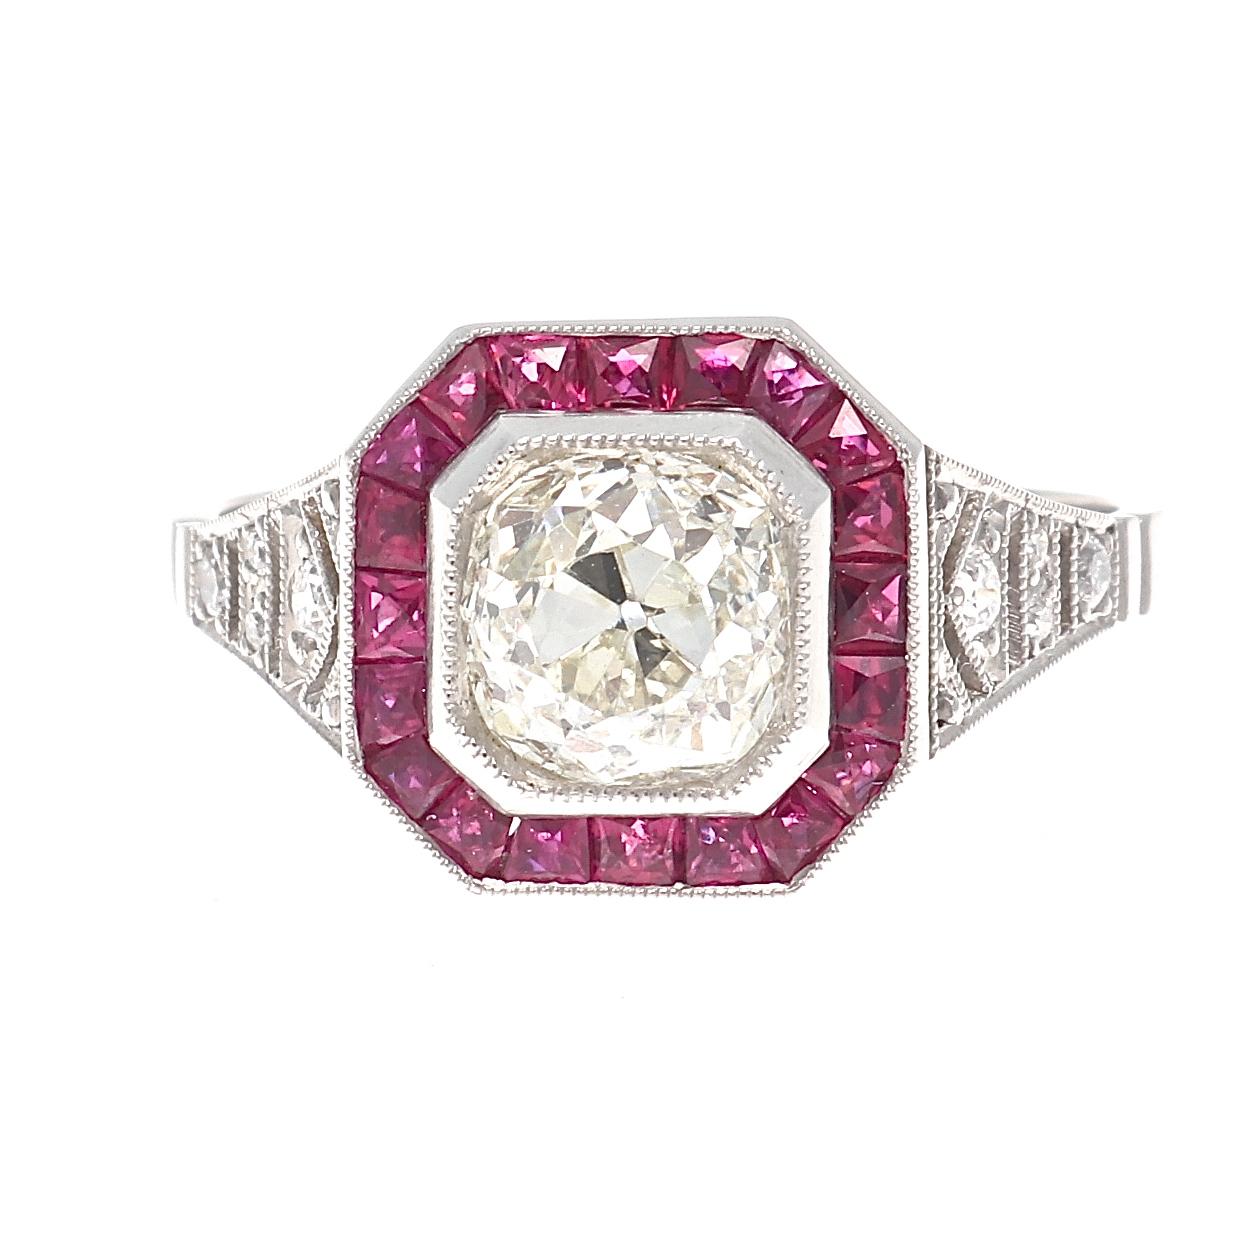 Tradition and design that will last a lifetime. Featuring a 1.25 carat old European cut diamond that is approximately M color, VS1 clarity. Surrounded by a halo of radiating red rubies. Crafted in platinum. Ring size 6-3/4 and can easily be resized